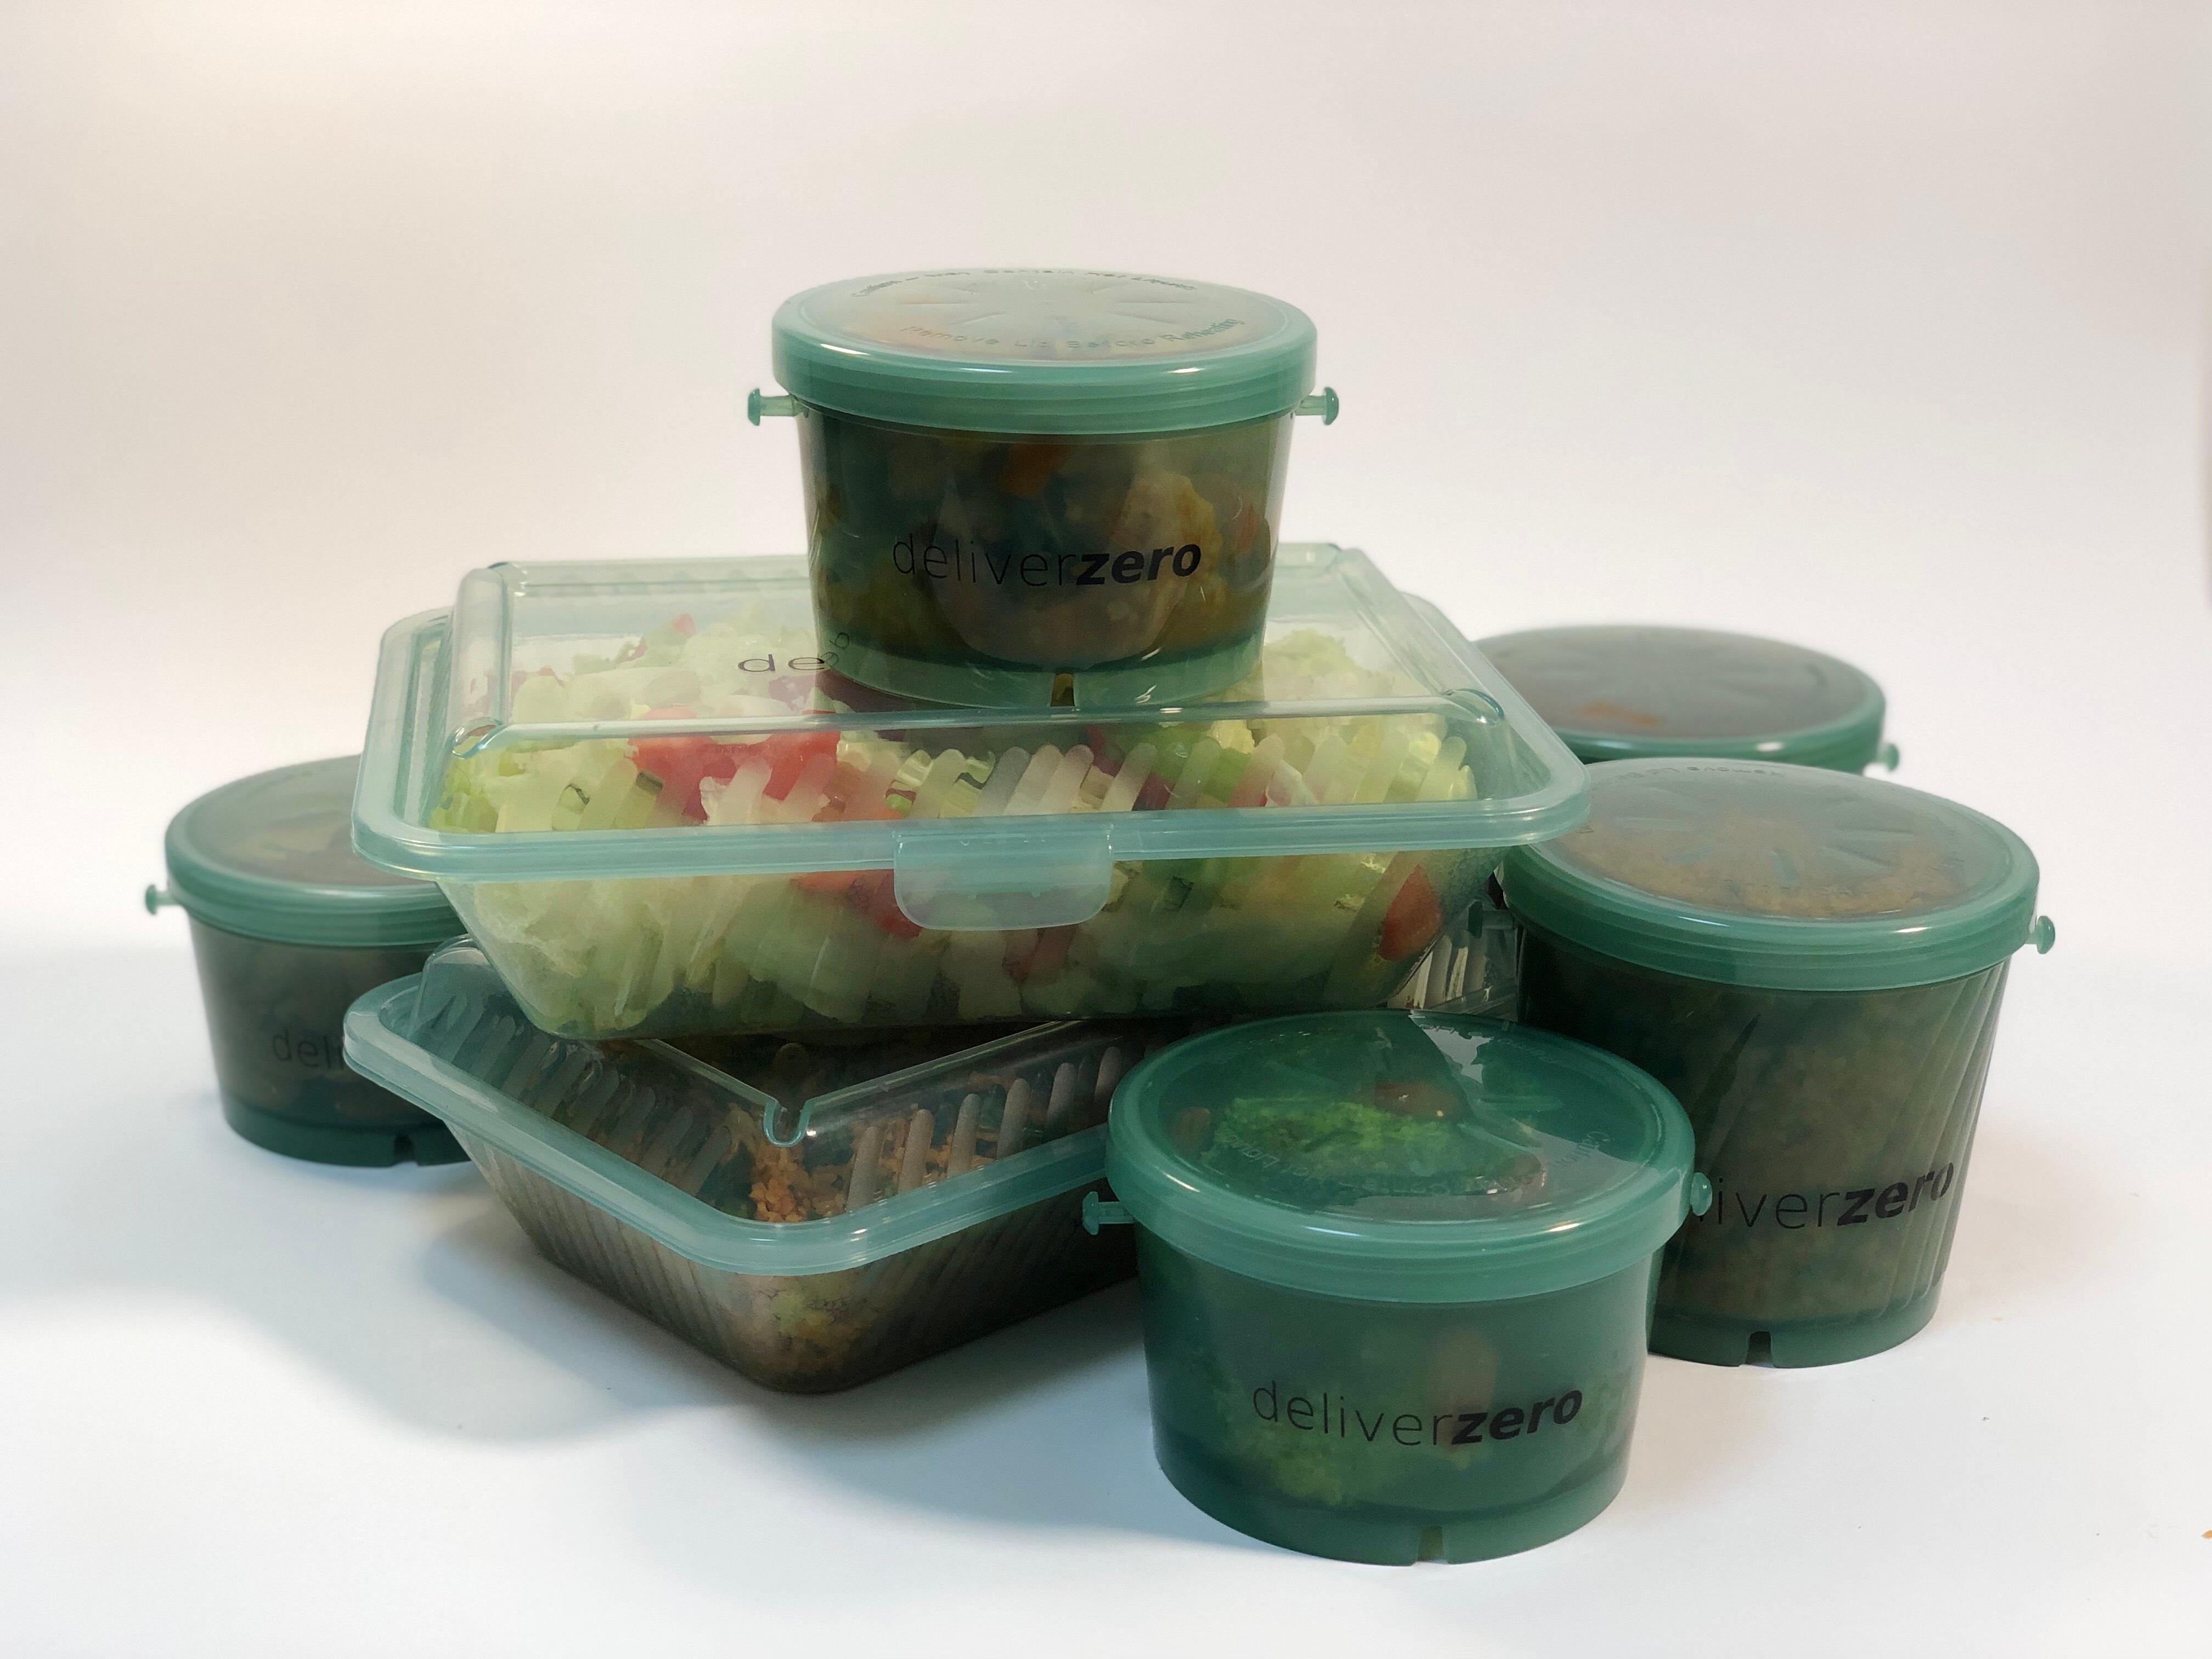 DeliverZero - Food to go in reusable containers